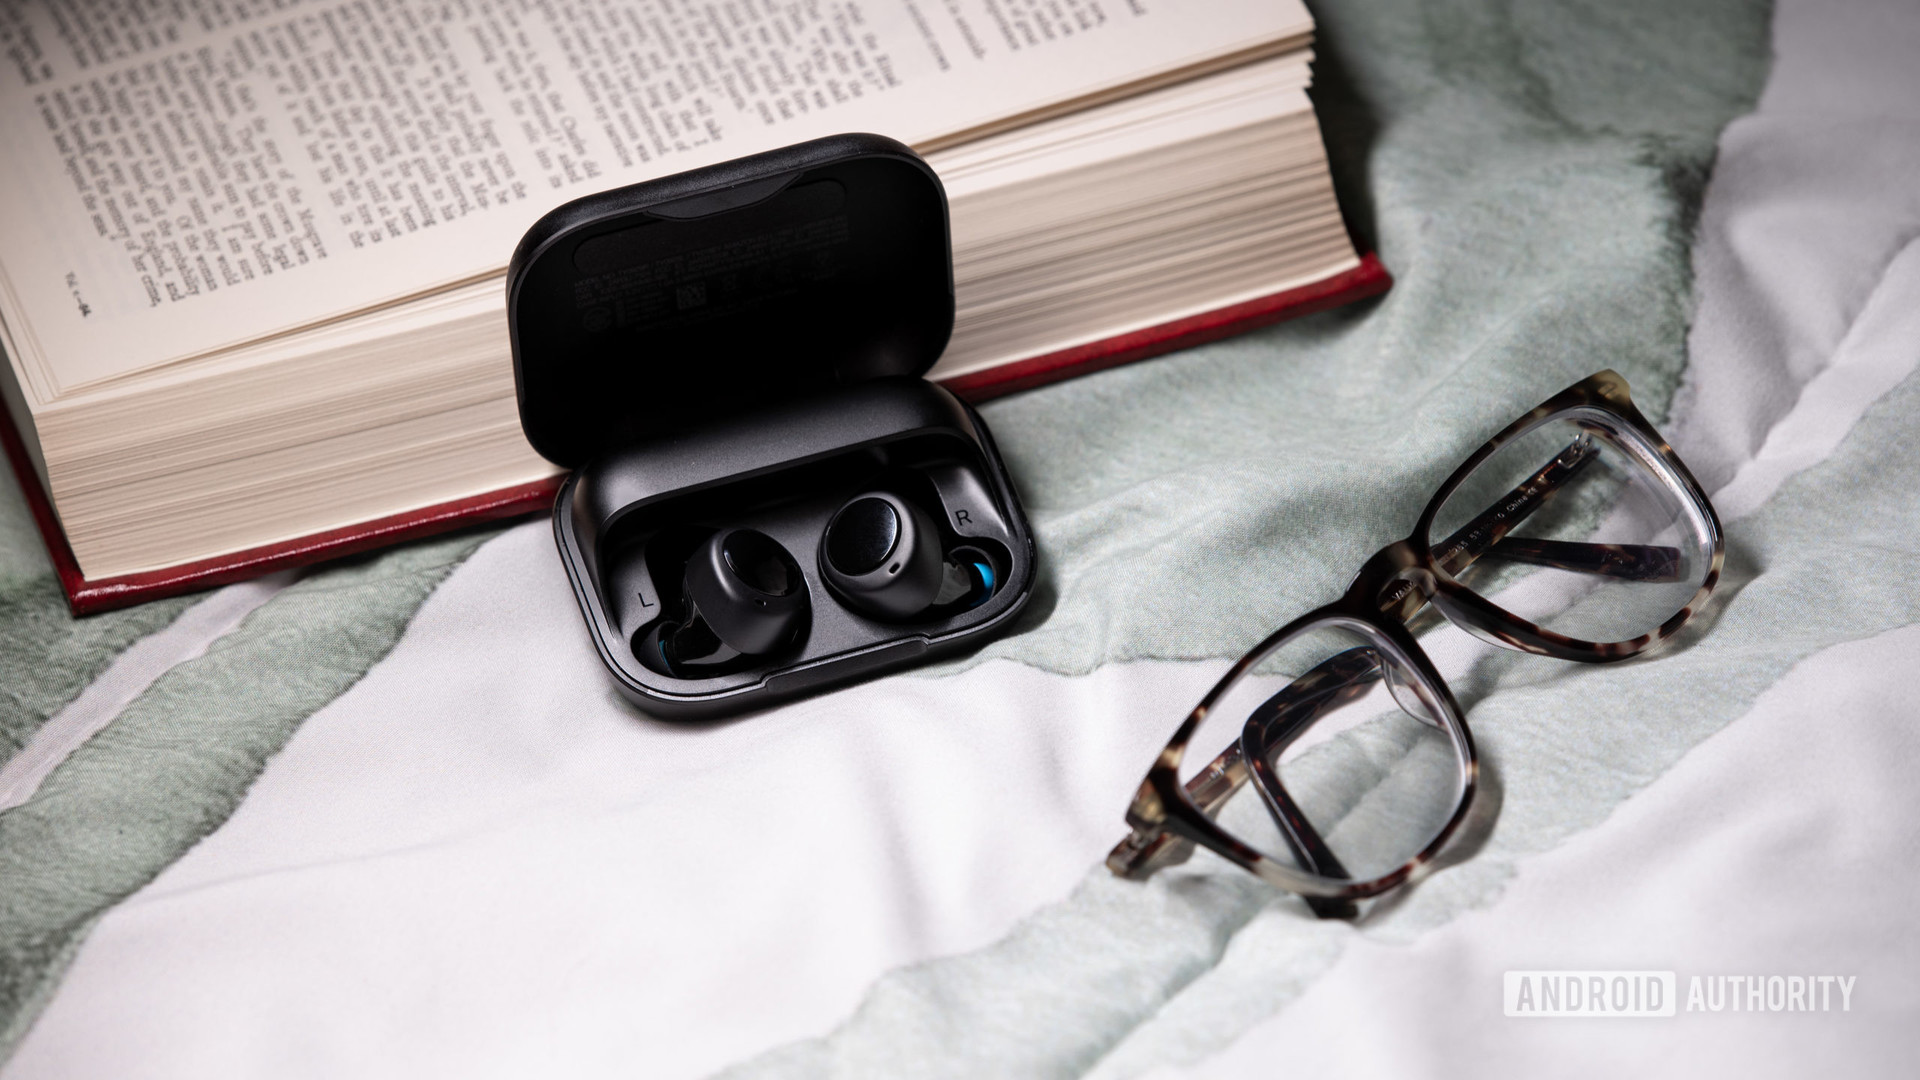 The Amazon Echo Buds true wireless earbuds in the charging case next to a pair of glasses.